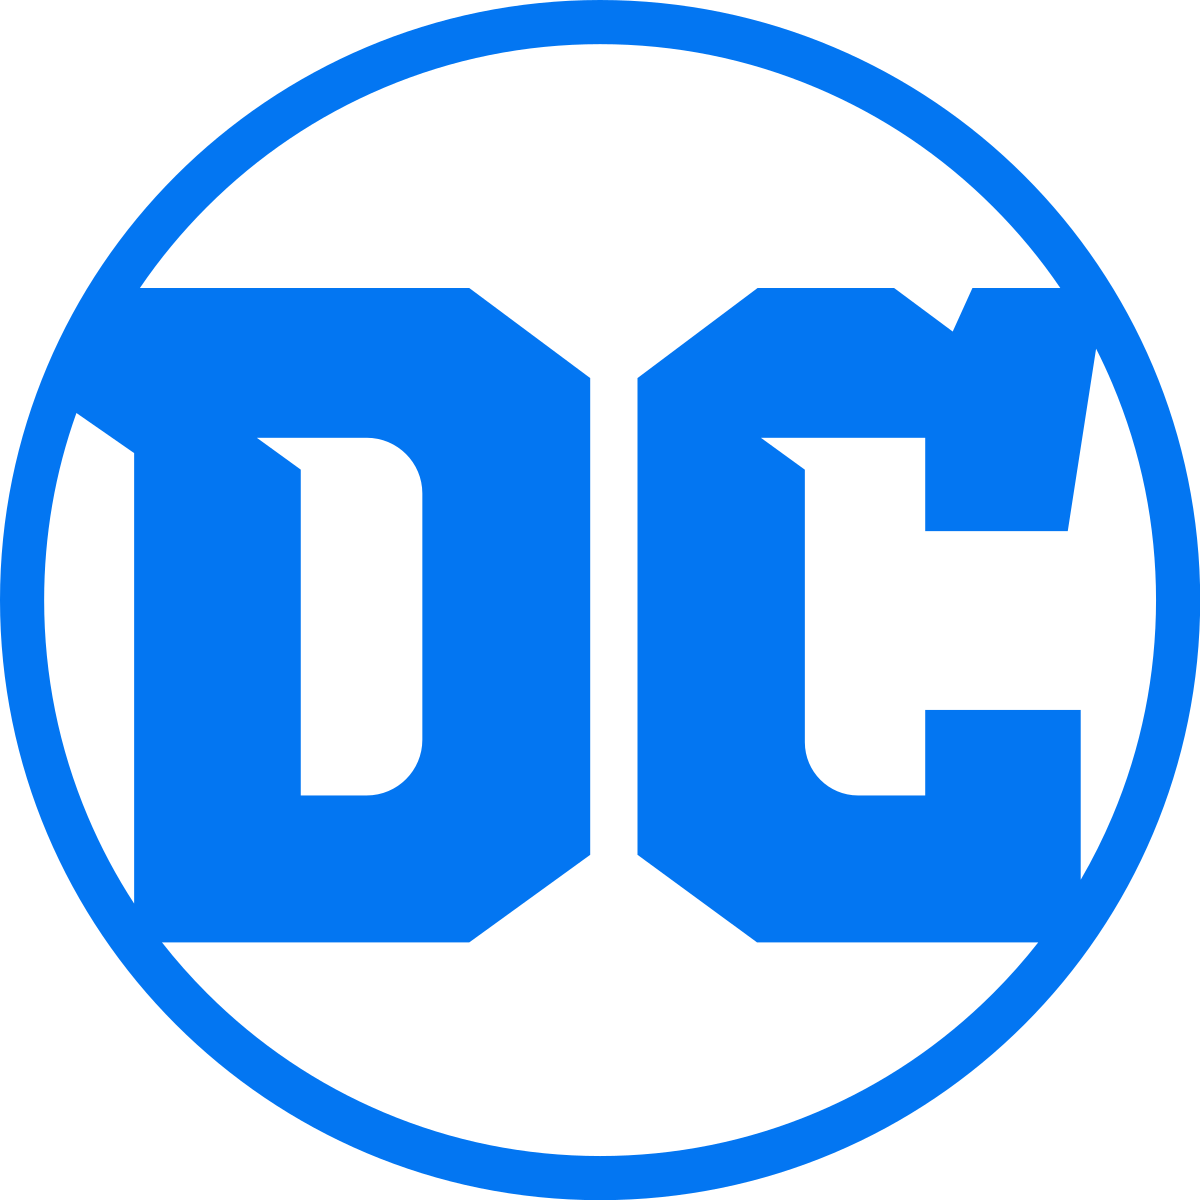 Lines Forming a Blue and White Diamond Logo - DC Comics